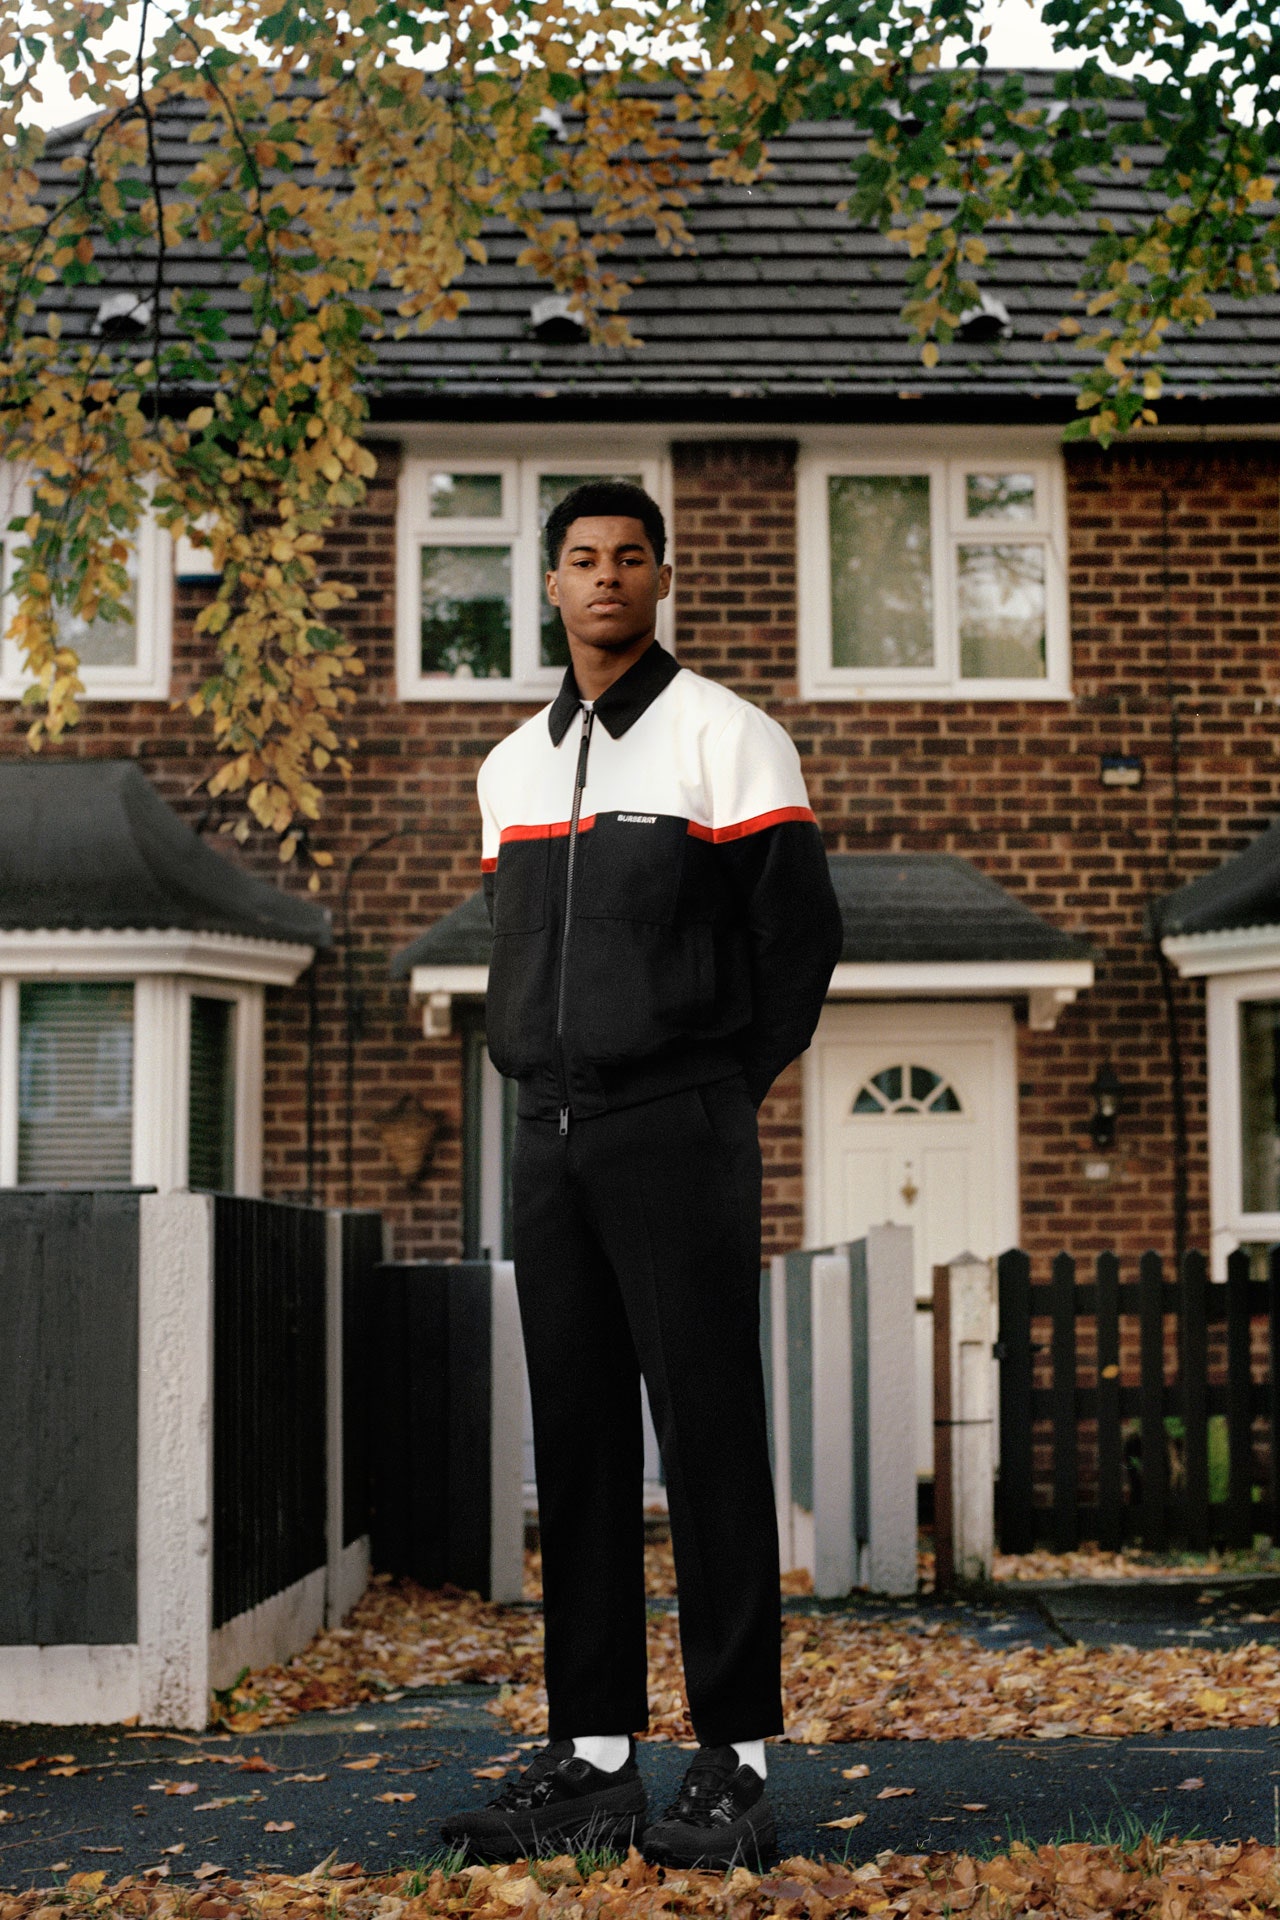 Marcus Rashford and Burberry are joining forces for good | British GQ